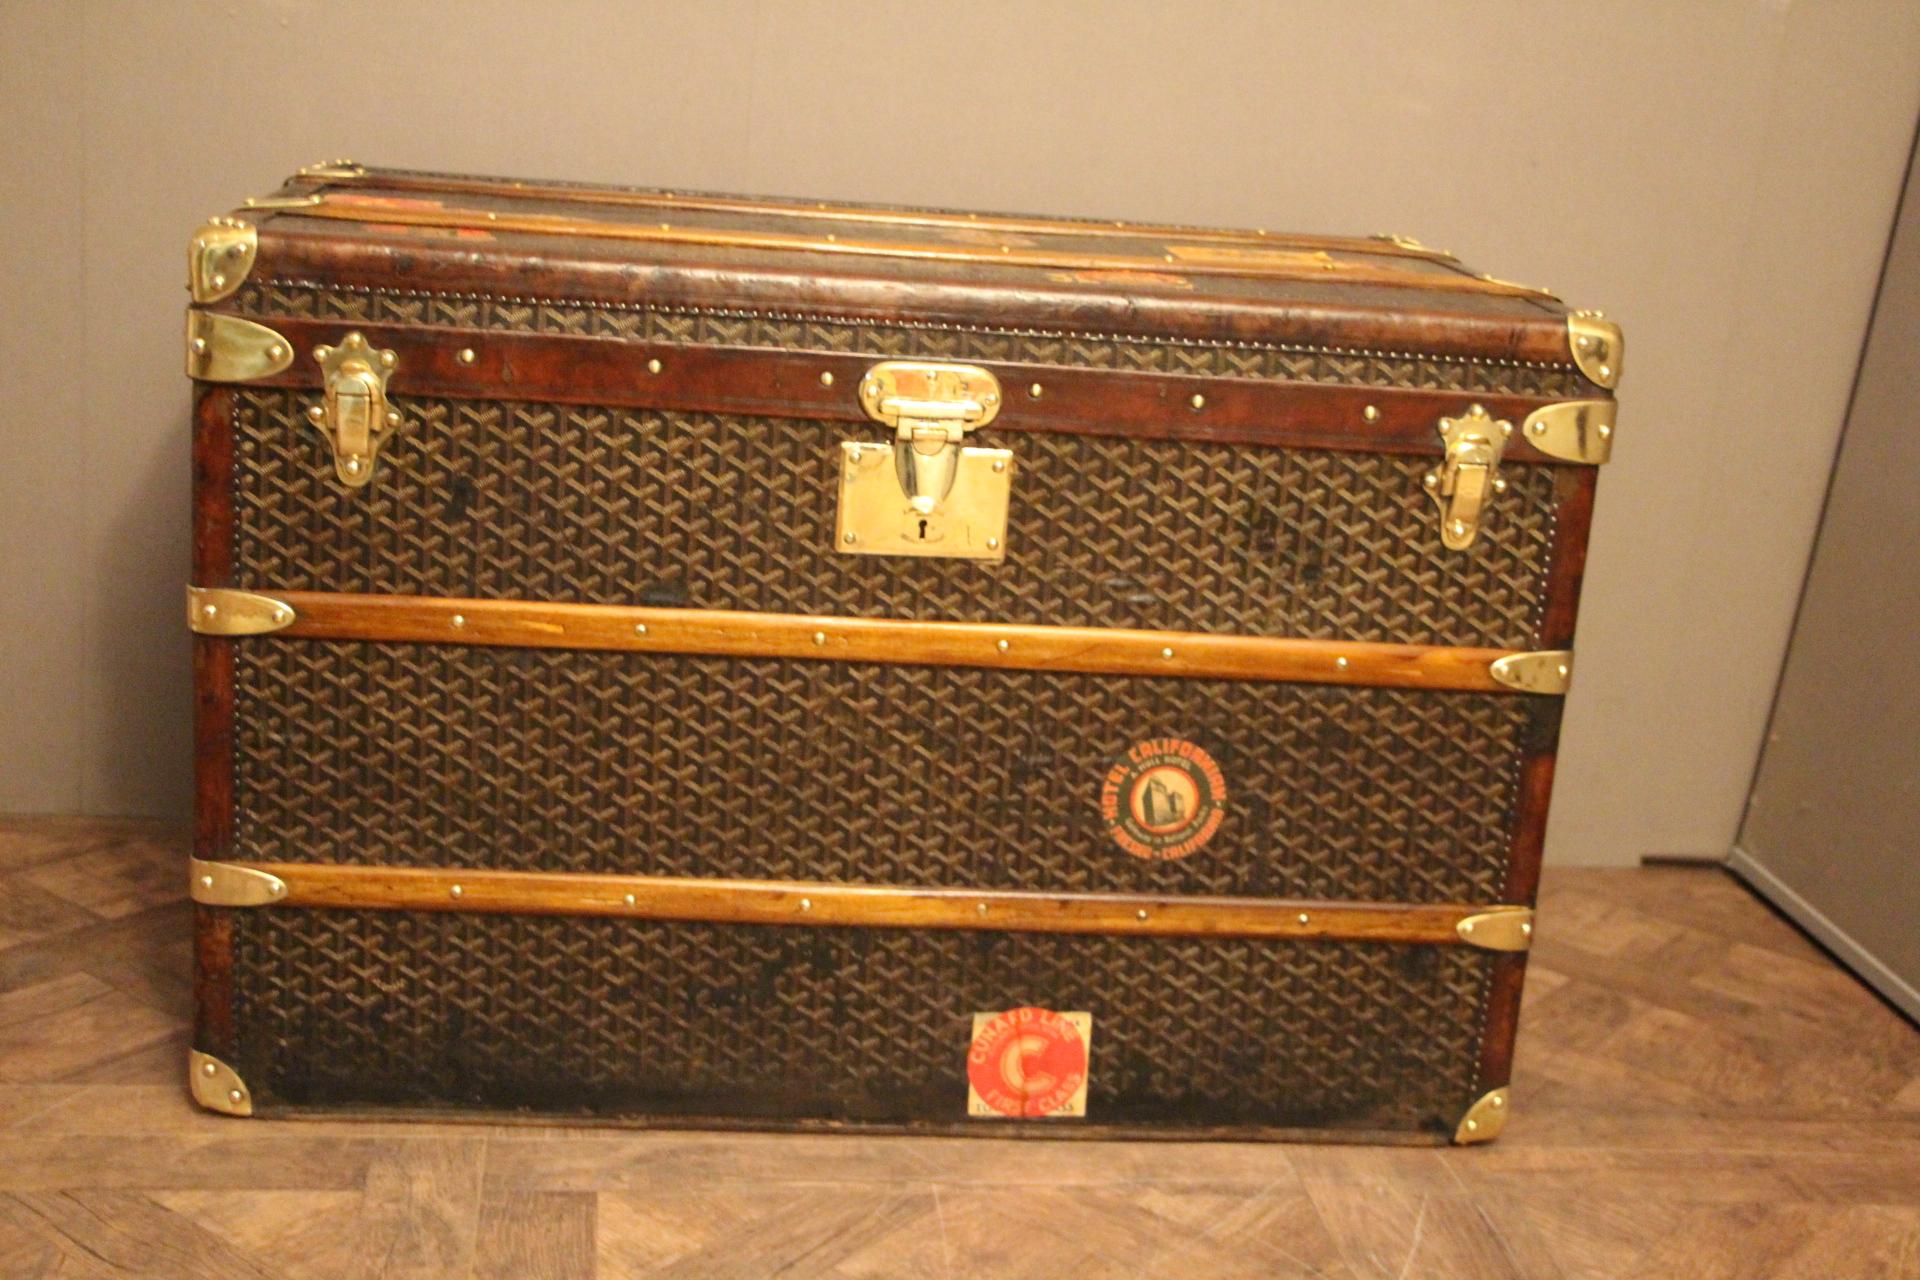 This gorgeous Goyard trunk features the very sought after good condition chevrons canvas as well as leather trim, brass corners, Goyard stamped brass locks and side handles. Customized painted French flag on each side and a couple of traveling